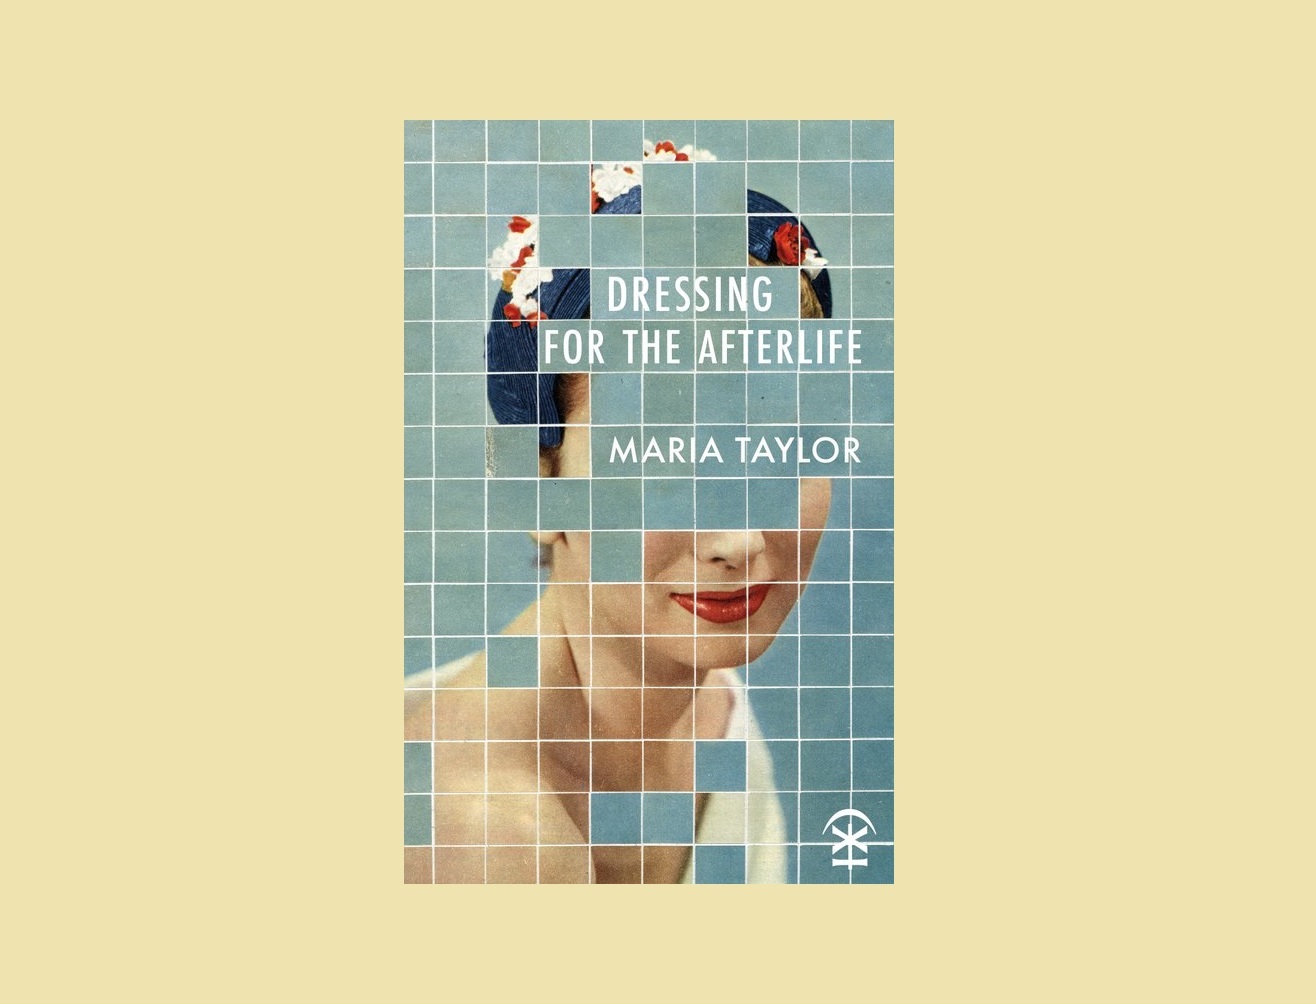 On ‘Dressing for the Afterlife’ by Maria Taylor